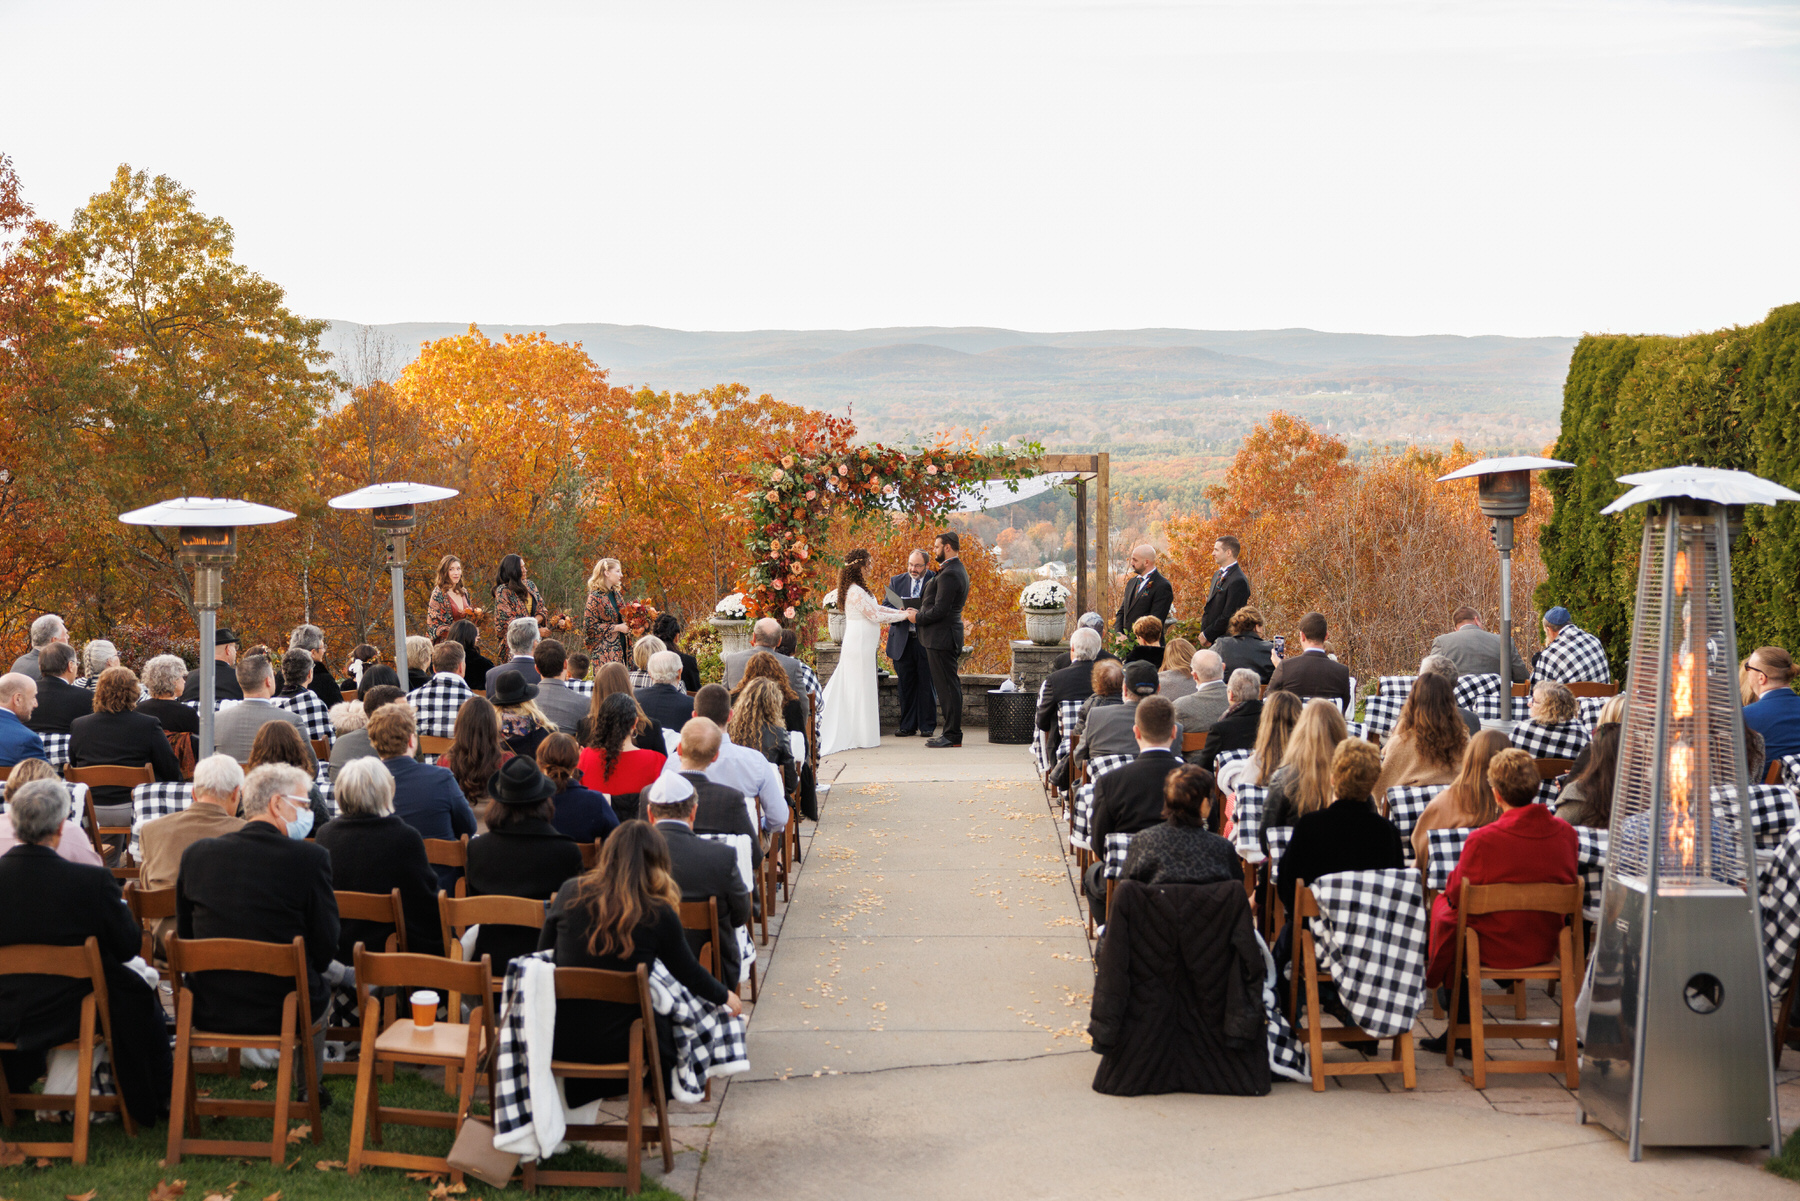 An outdoor wedding ceremony with guests seated facing a couple at the altar, set against a backdrop of autumn hills, perfectly planned for exquisite wedding photography.